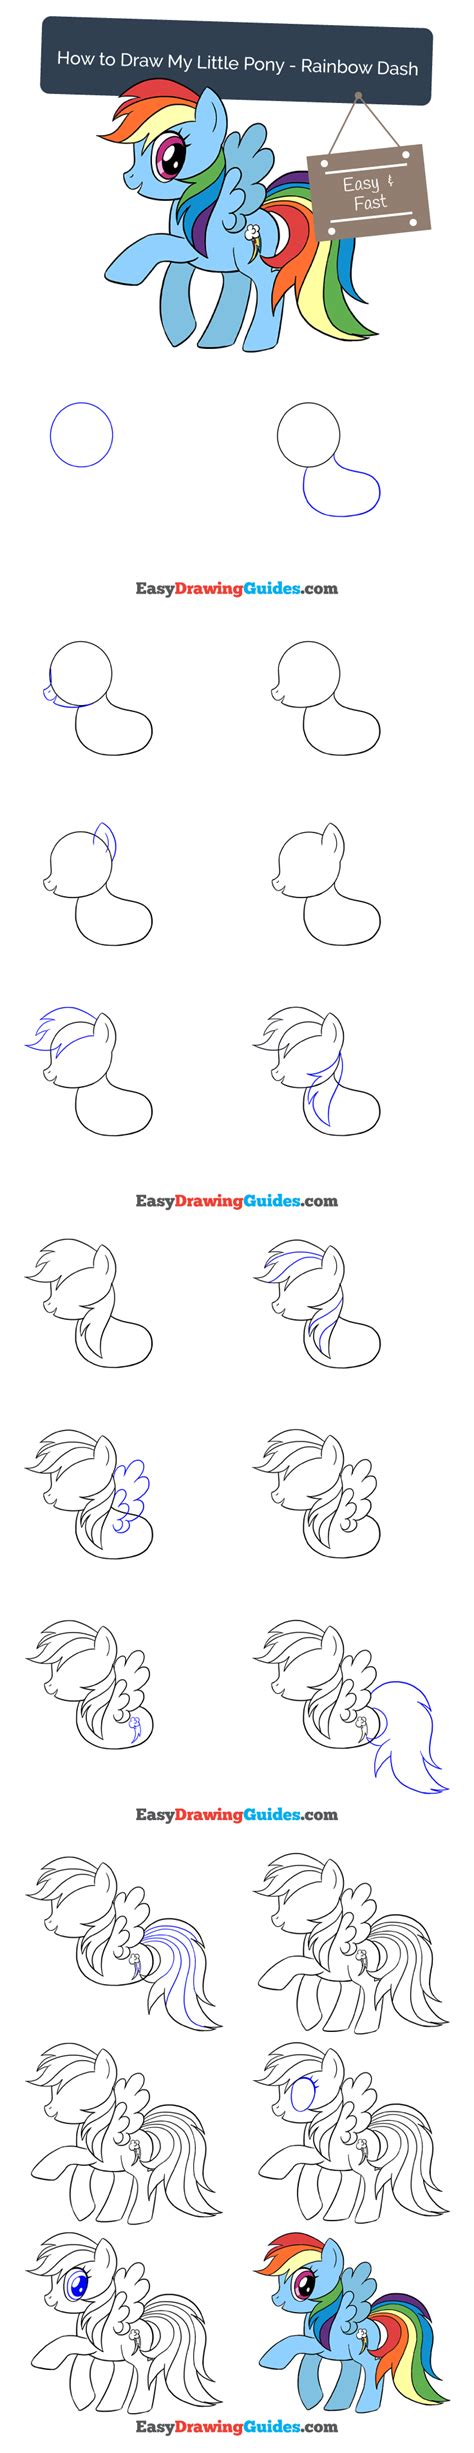 Learn How To Draw Rainbow Dash From My Little Pony Easy Step By Step